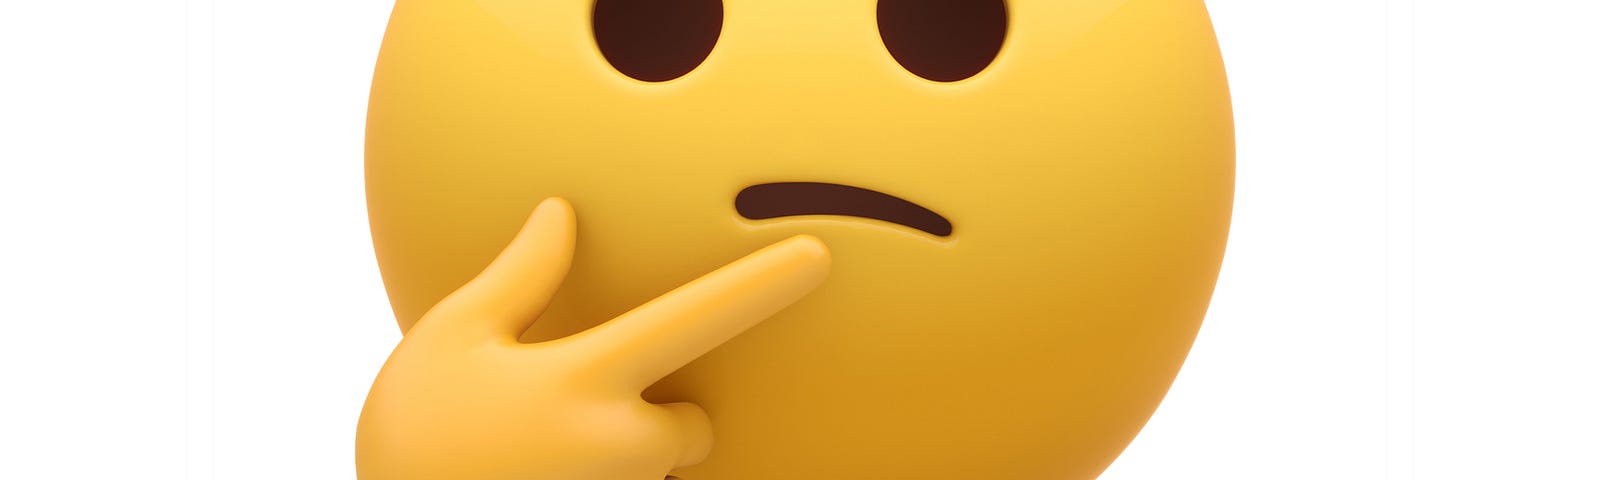 Huge emoji with a puzzled look on its face and a hand held up to its face in a pose that indicates confusion and lack of confidence.